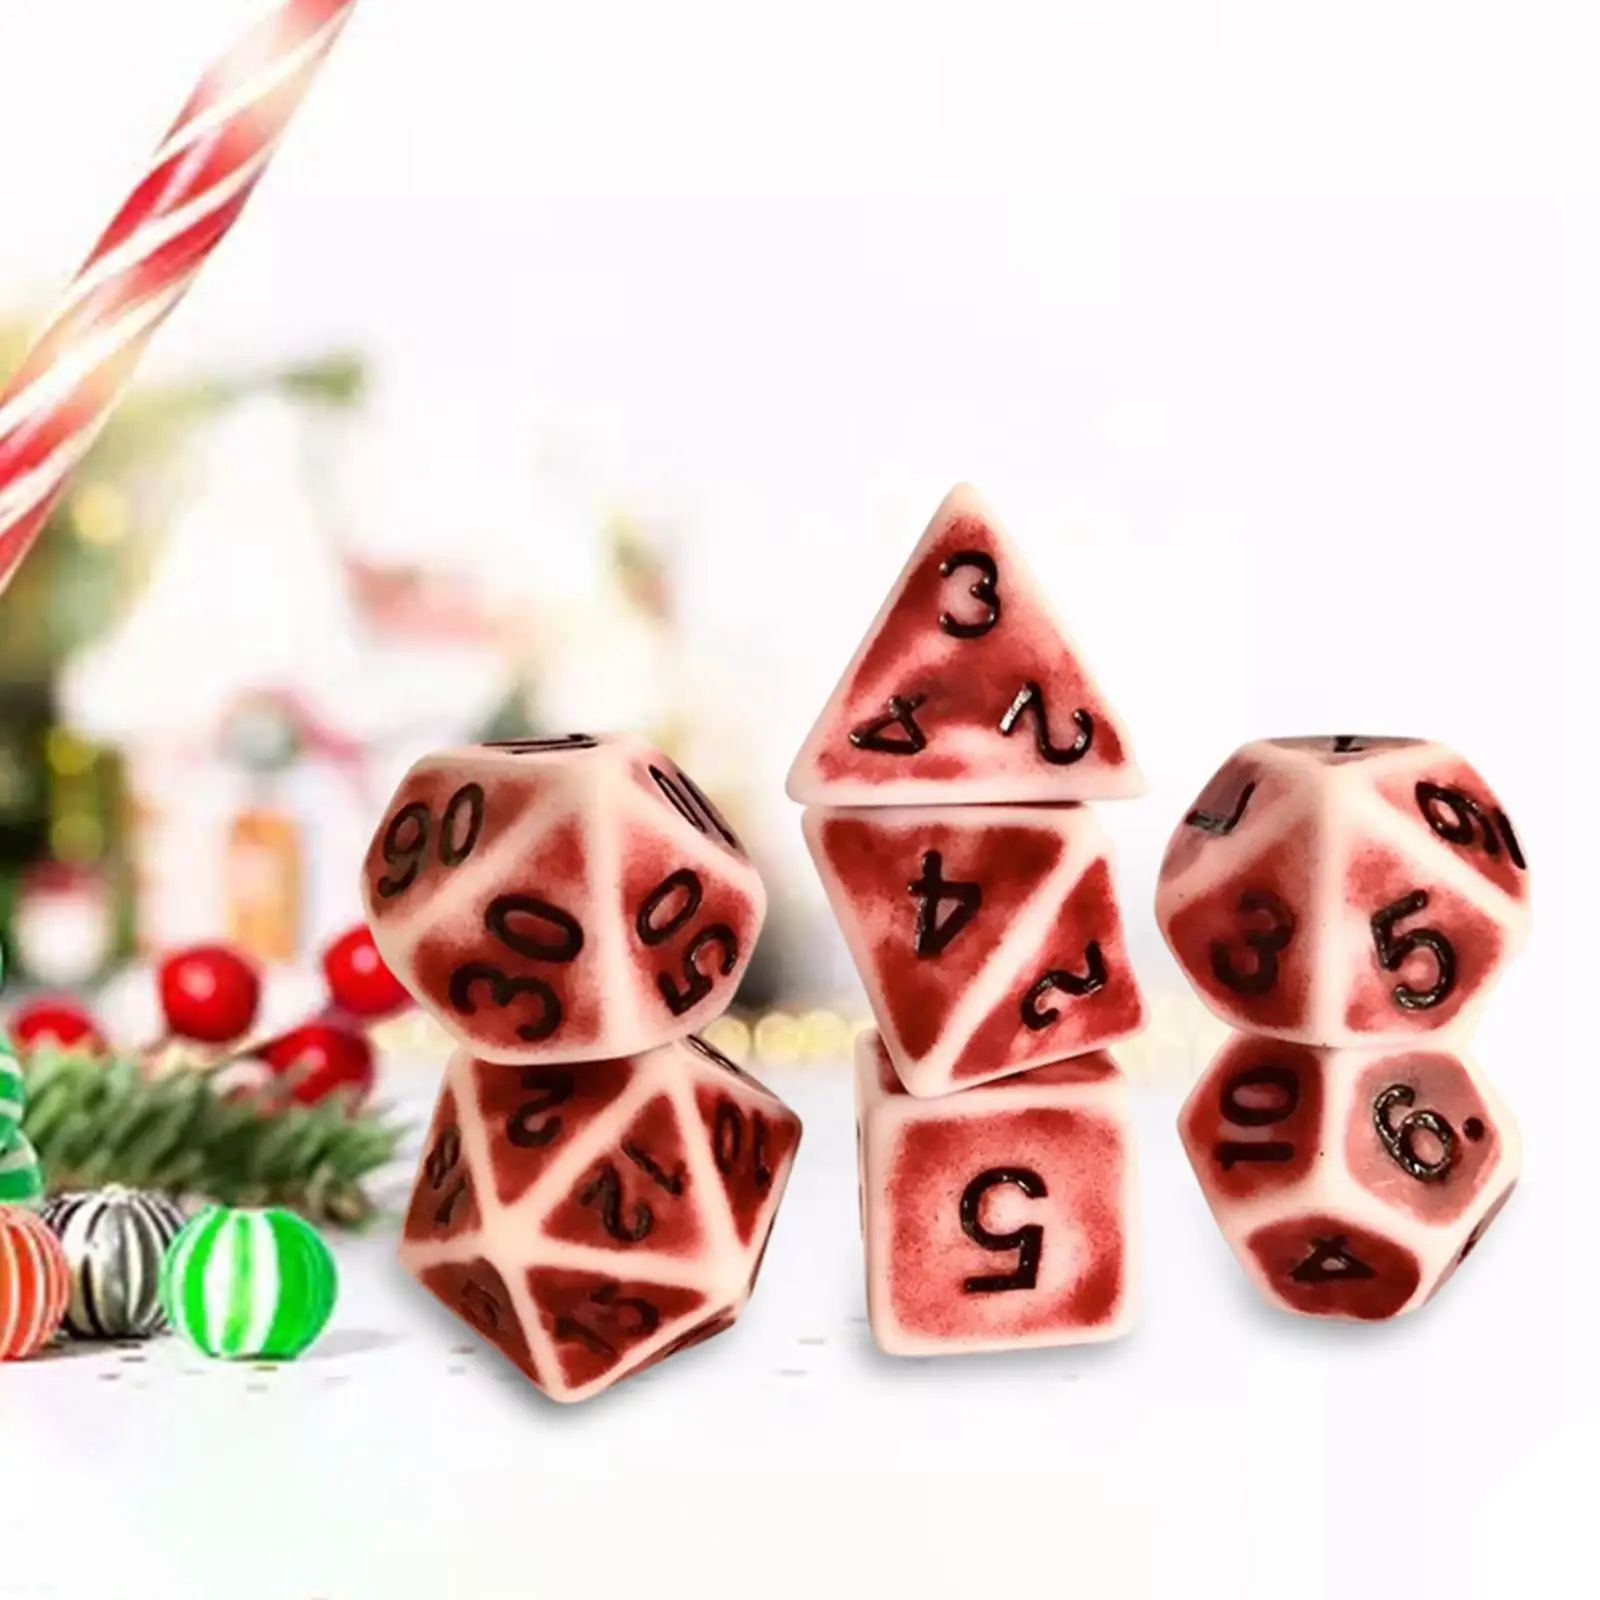 Acrylic 7-Die Polyhedral Dice Party Favor Retro Color Multi Sided Dice for Table Games Role Playing Games D&D DND RPG MTG